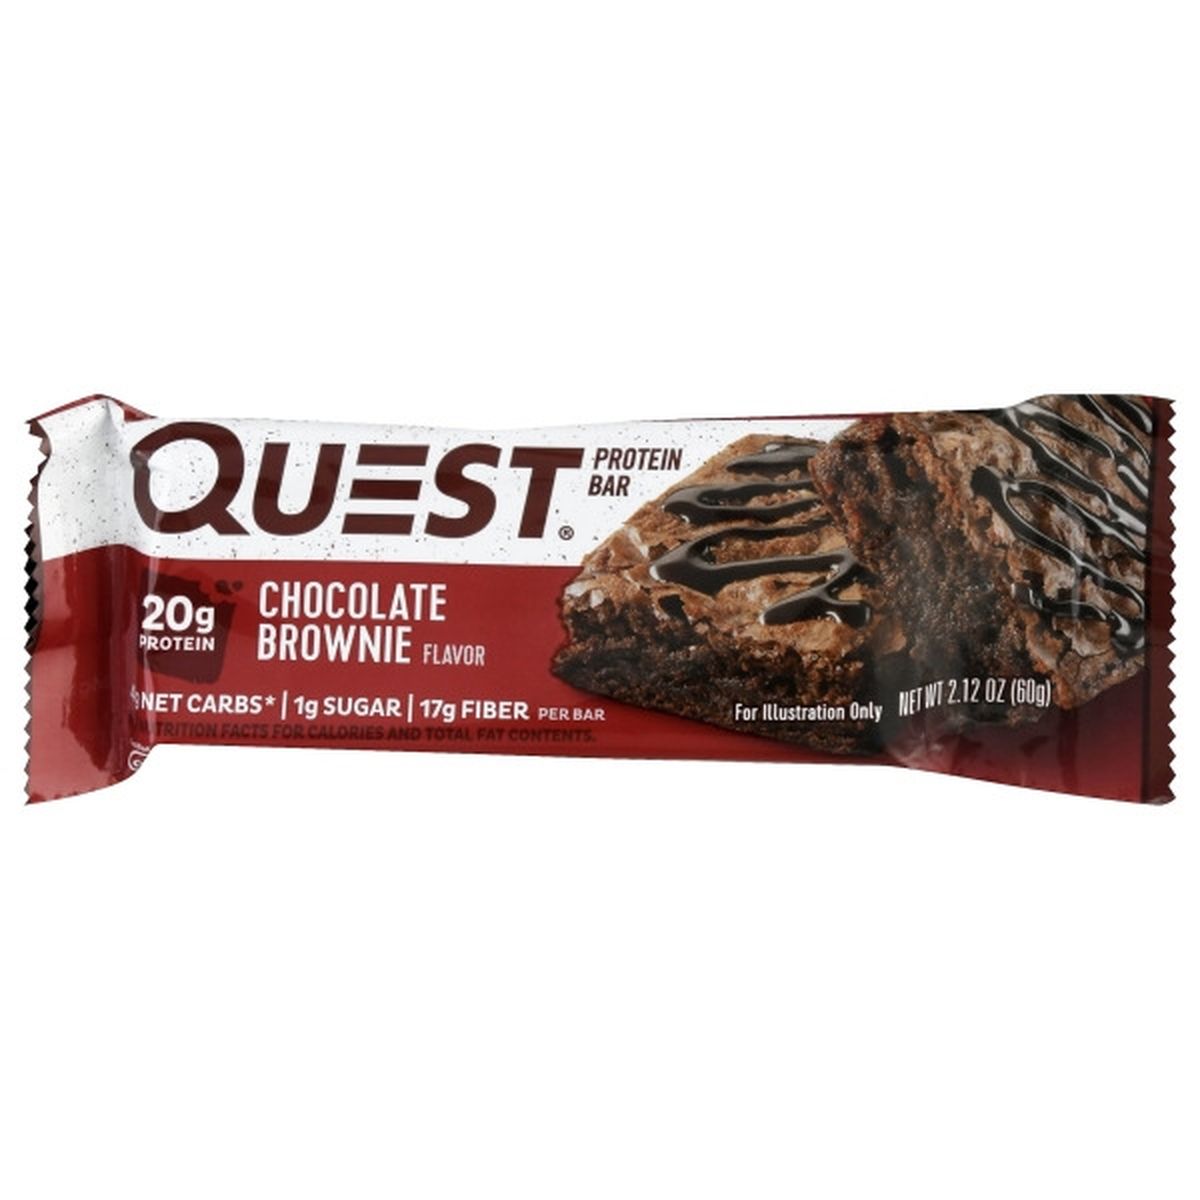 Calories in Quest Protein Bar, Chocolate Brownie Flavor